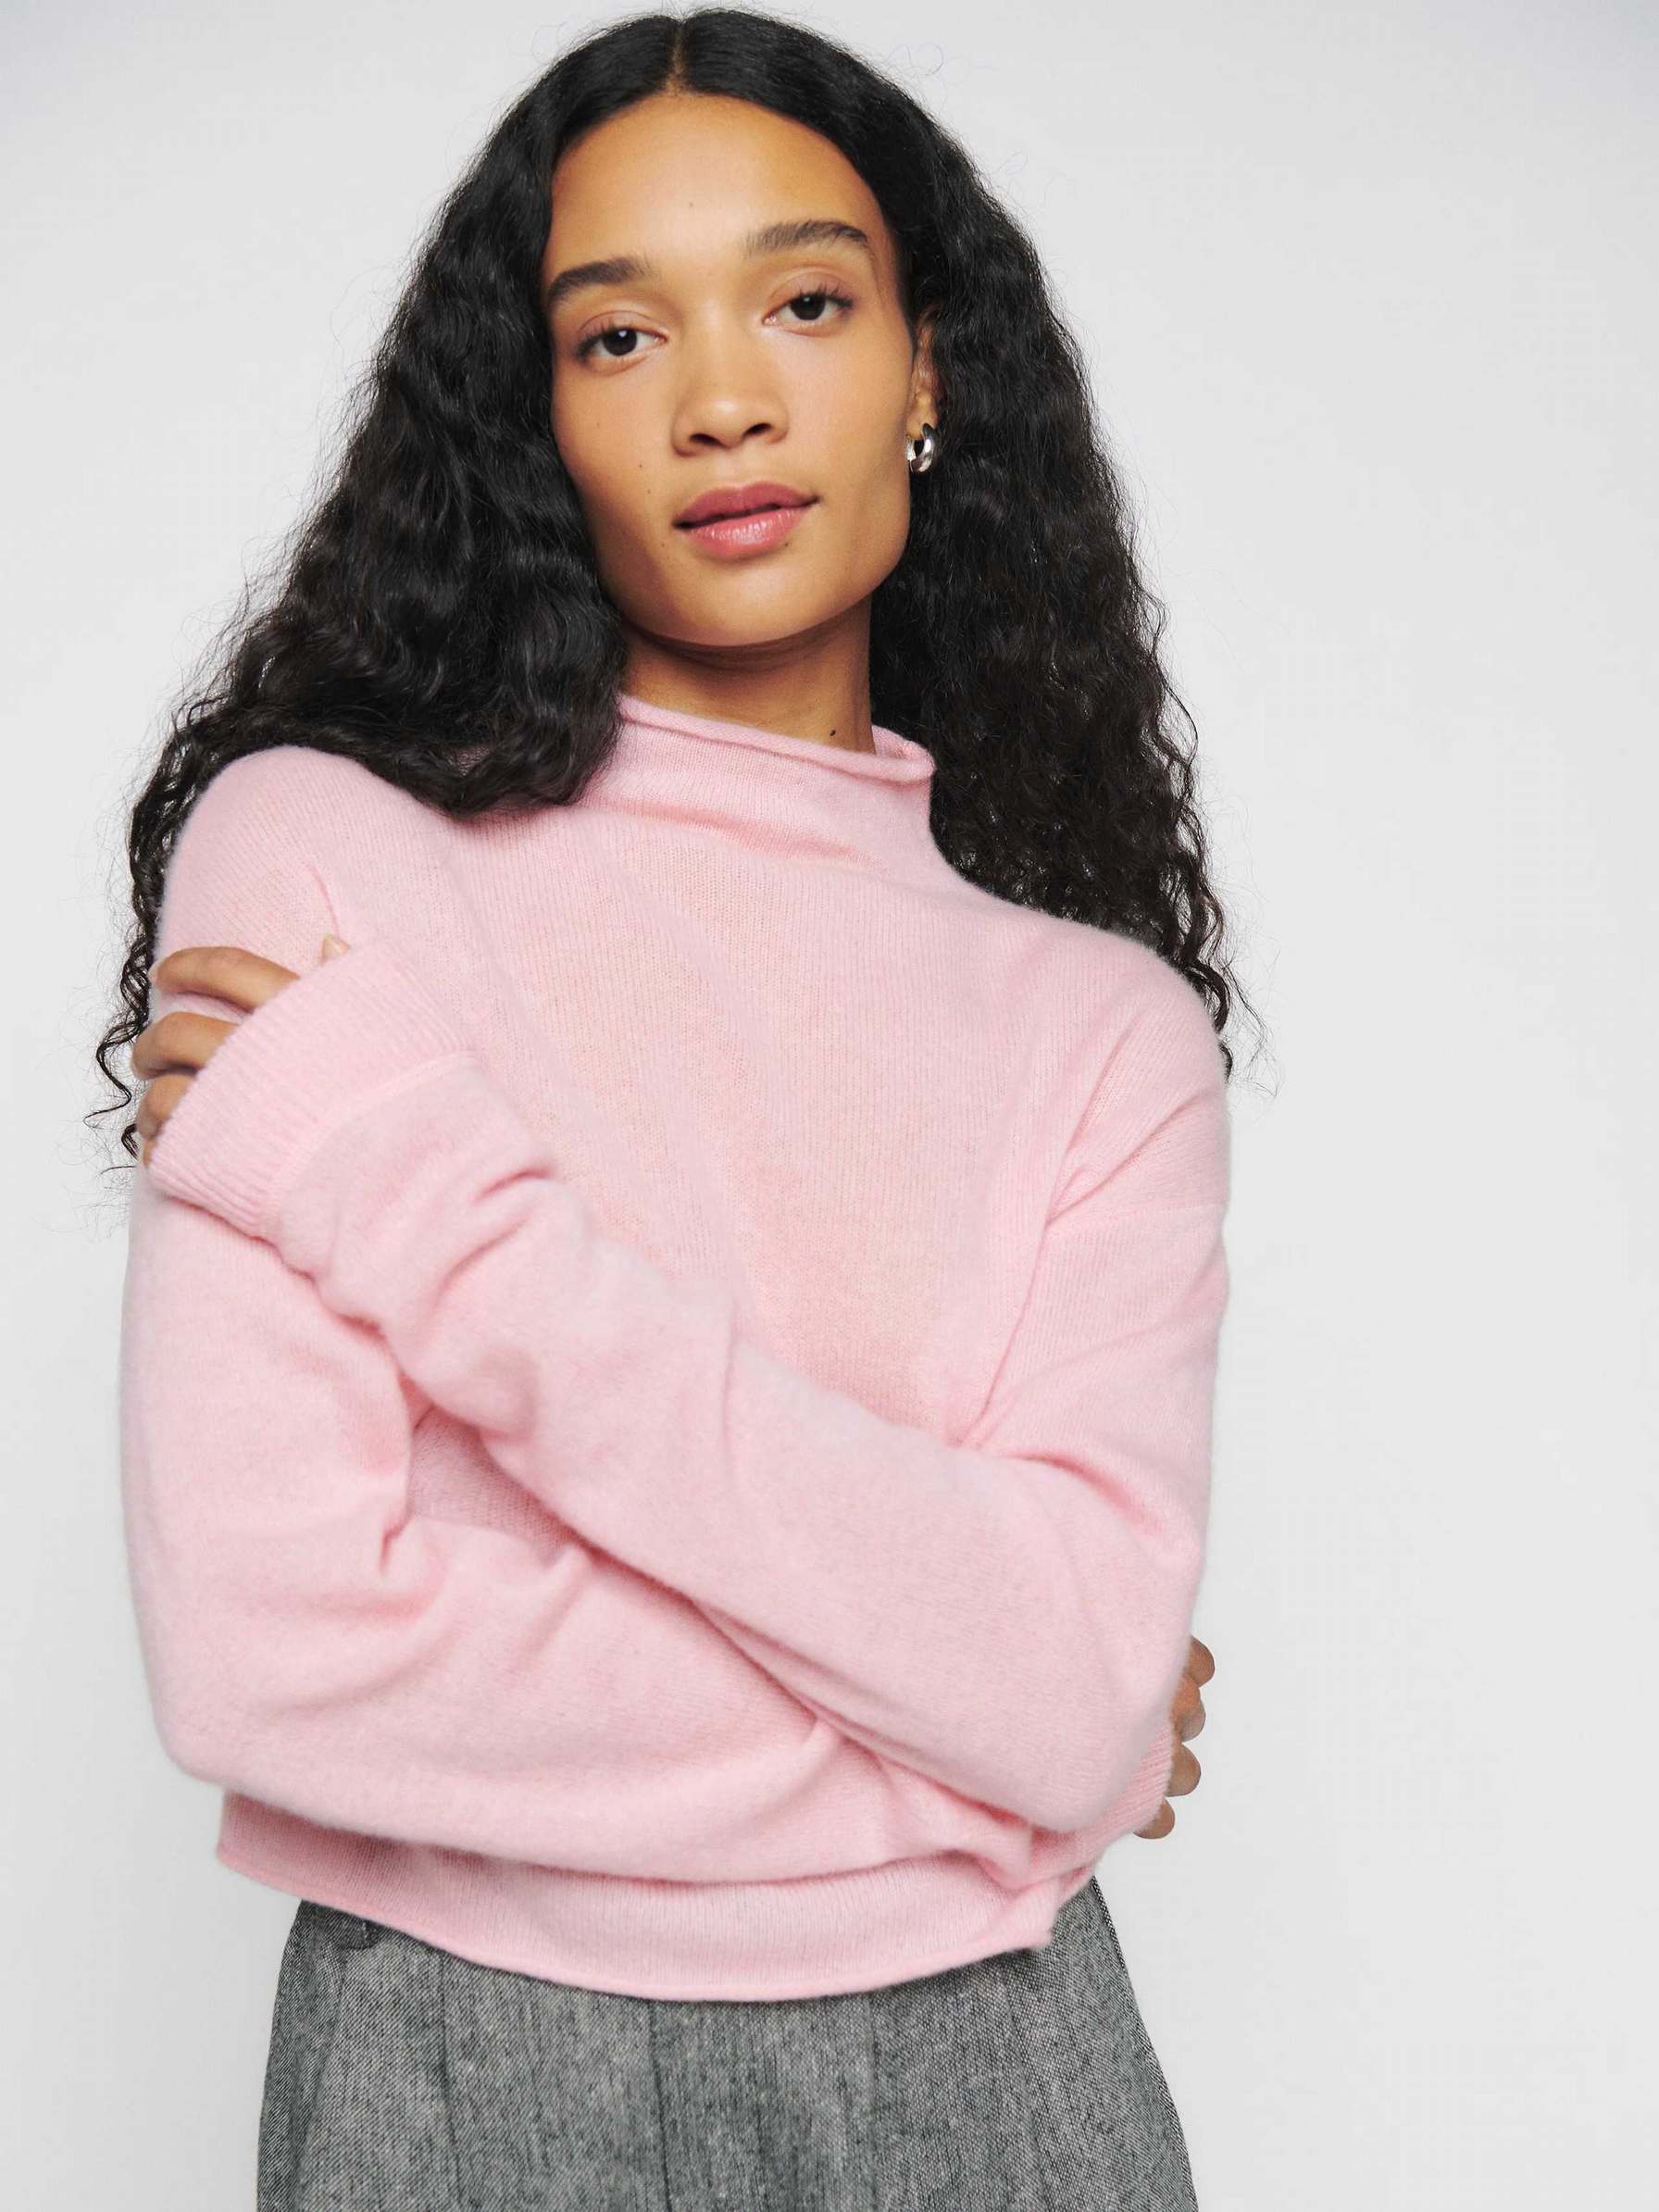 Reformation Cropped Cashmere Women's Sweater Pink | OUTLET-712058